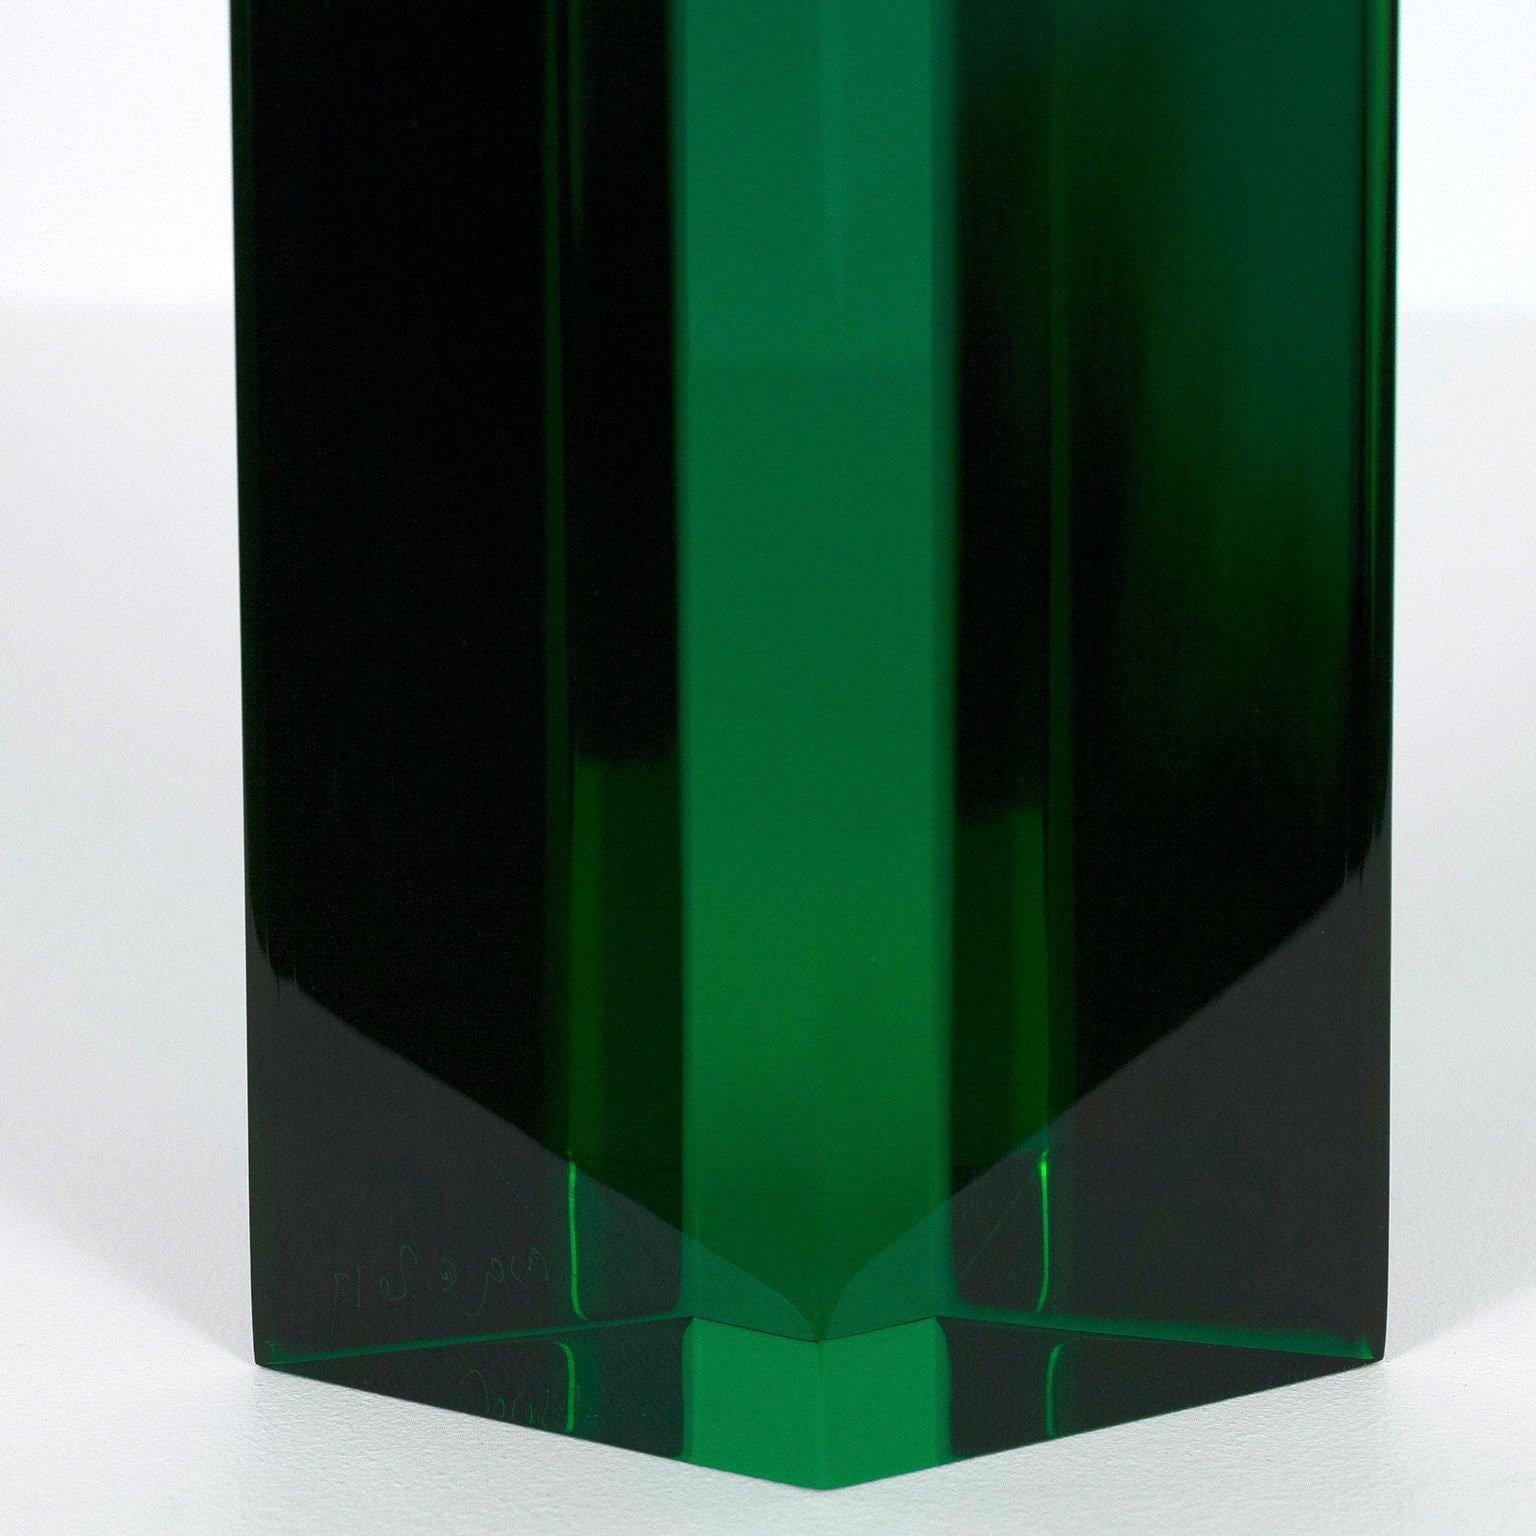 Vasa Mihich is a renowned Los Angeles based artist who is known for his sleek, colorful and captivating sculptures. His best works are composed of geometric planes of different colors suspended in acrylic. 

This work is a fantastic example of the